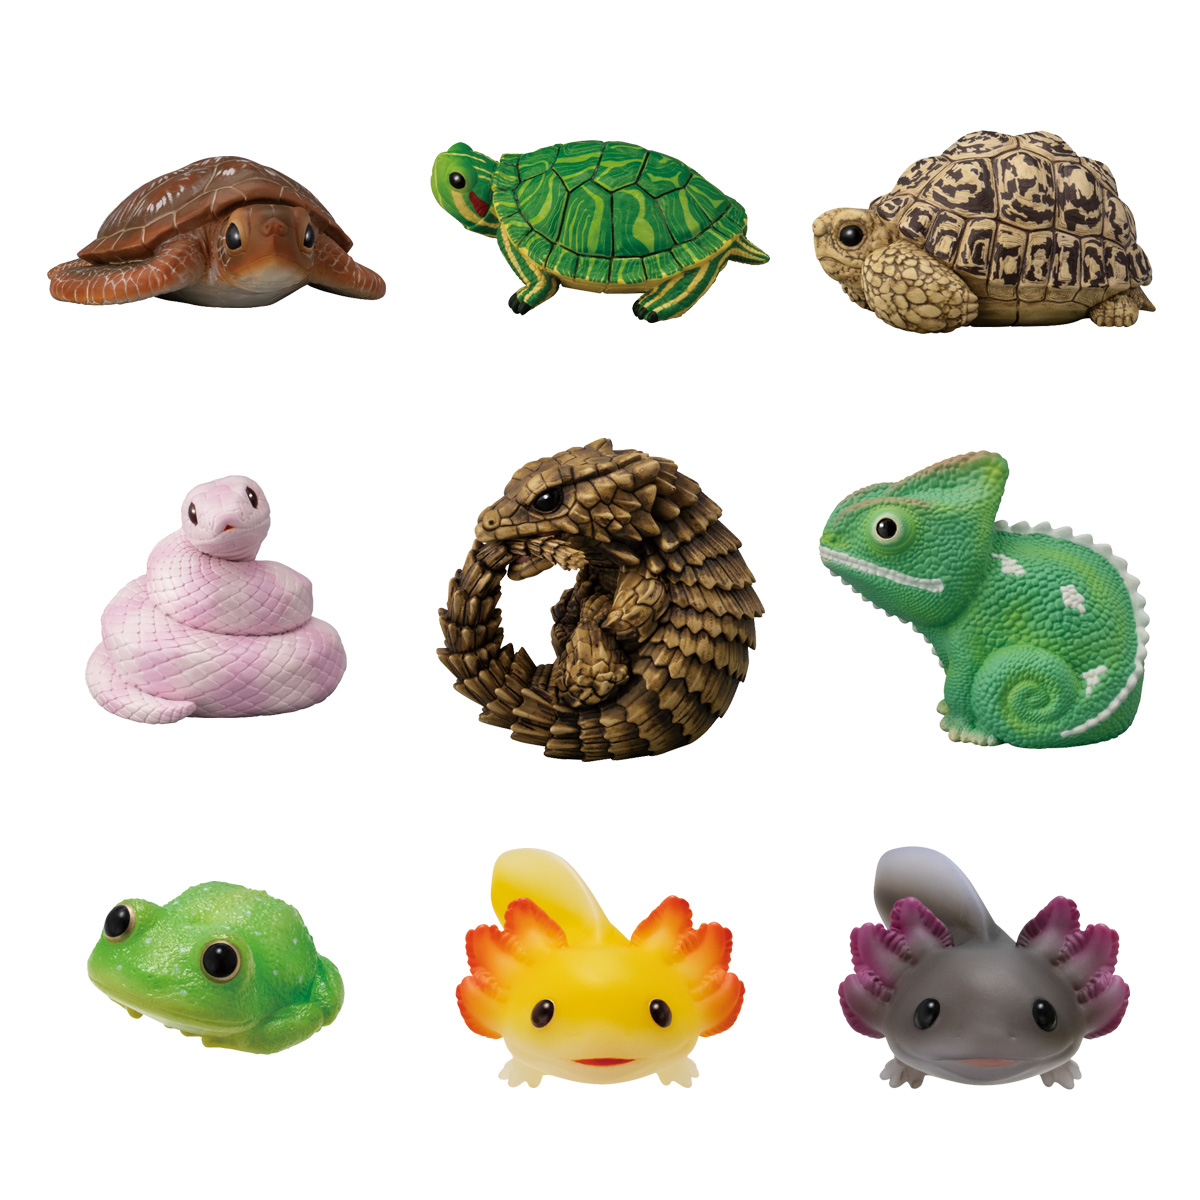 Tenori Friends 11 - Reptiles & Amphibians

This is a collection of cute, realistic representations of birds & animals made of soft vinyl that sits on the palm of your hand (Tenori). The approx. 3' tall creatures can be your perfect friends, pets, & ornaments. 

#Shokugan #Bandai